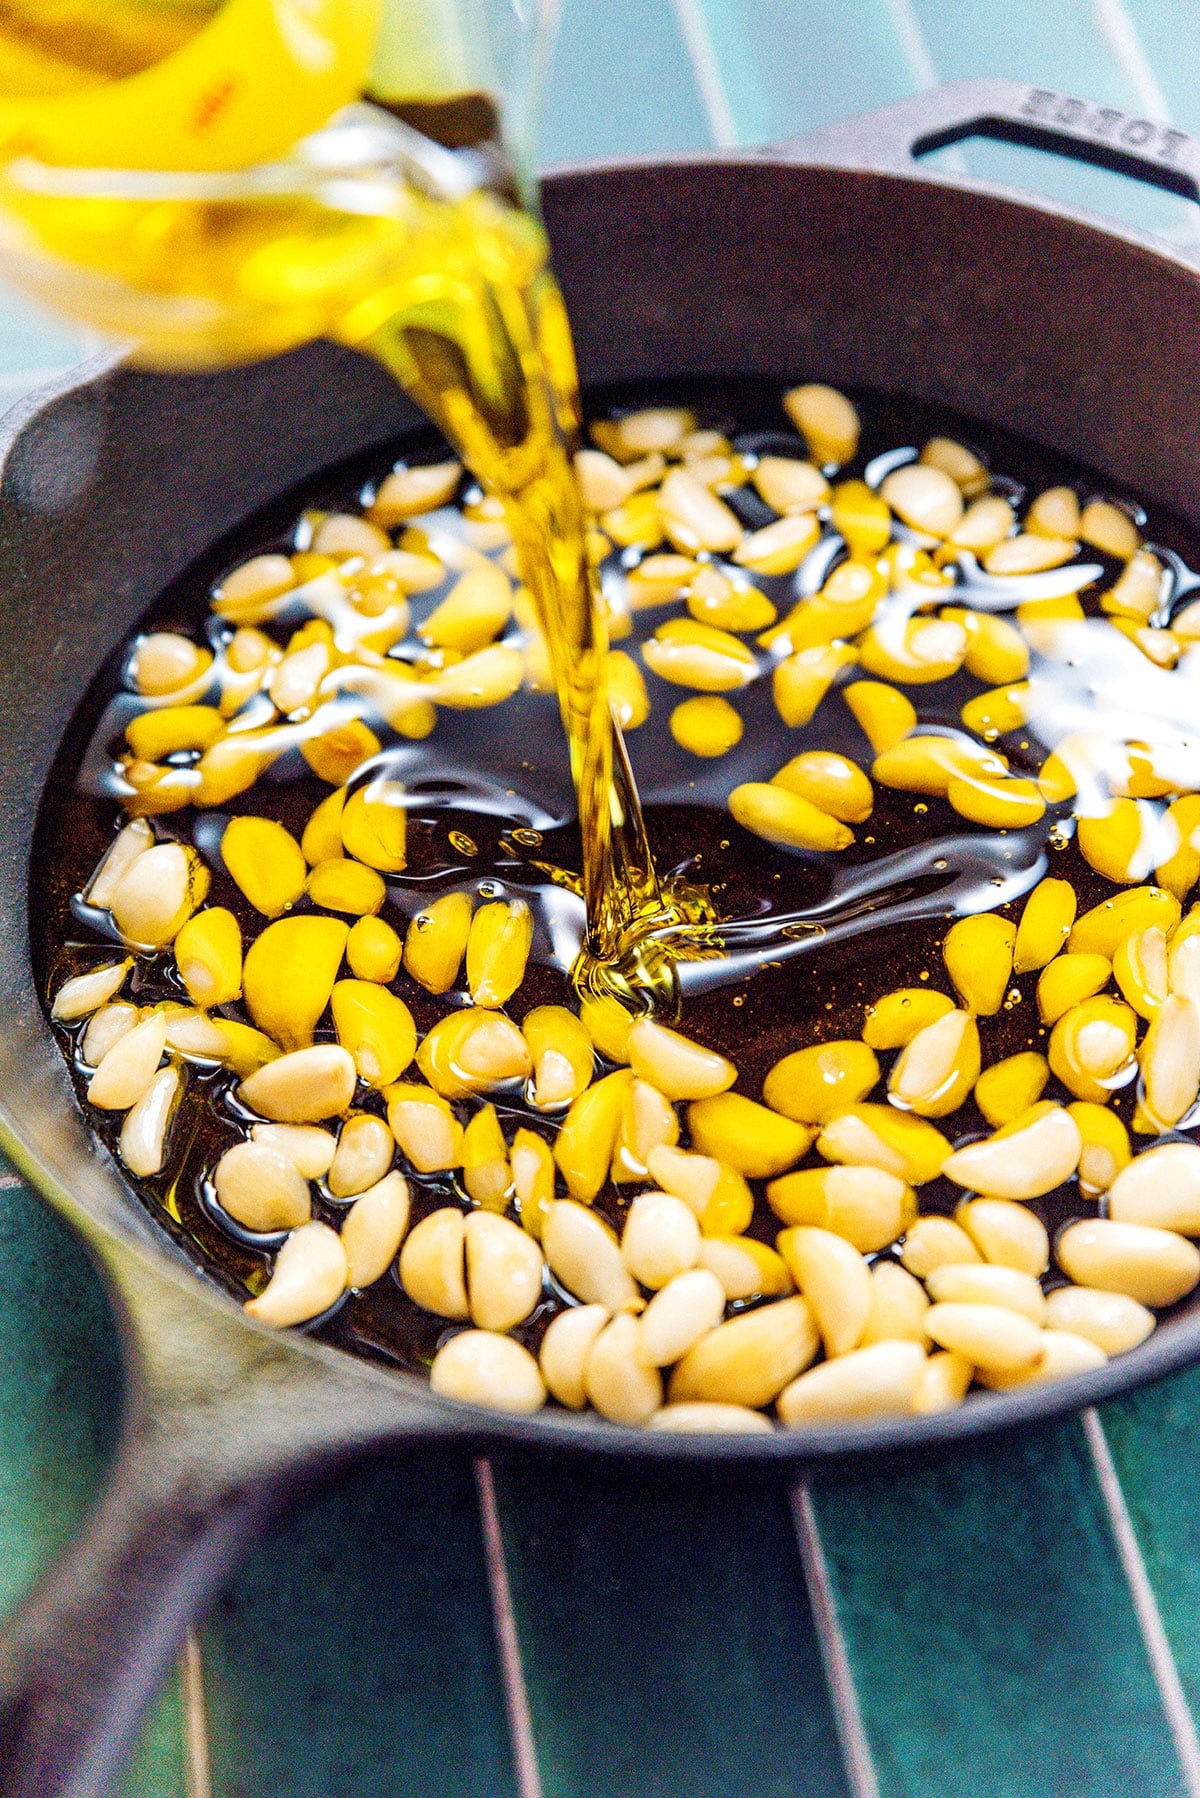 Pouring olive oil into a cast iron skillet filled with garlic cloves